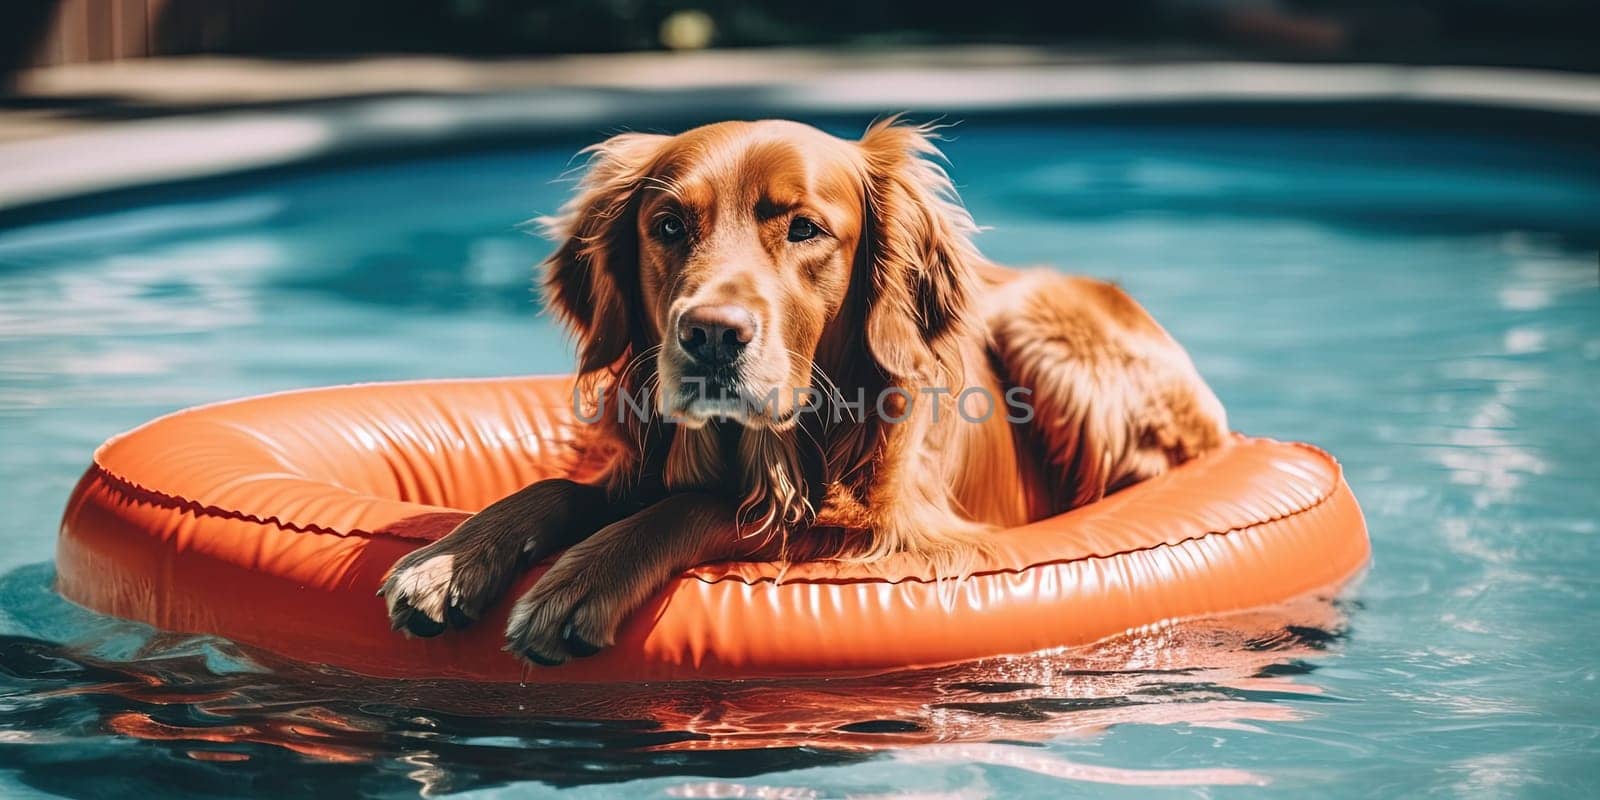 Dog enjoys swimming in pool with inflatable circle mattress on water.